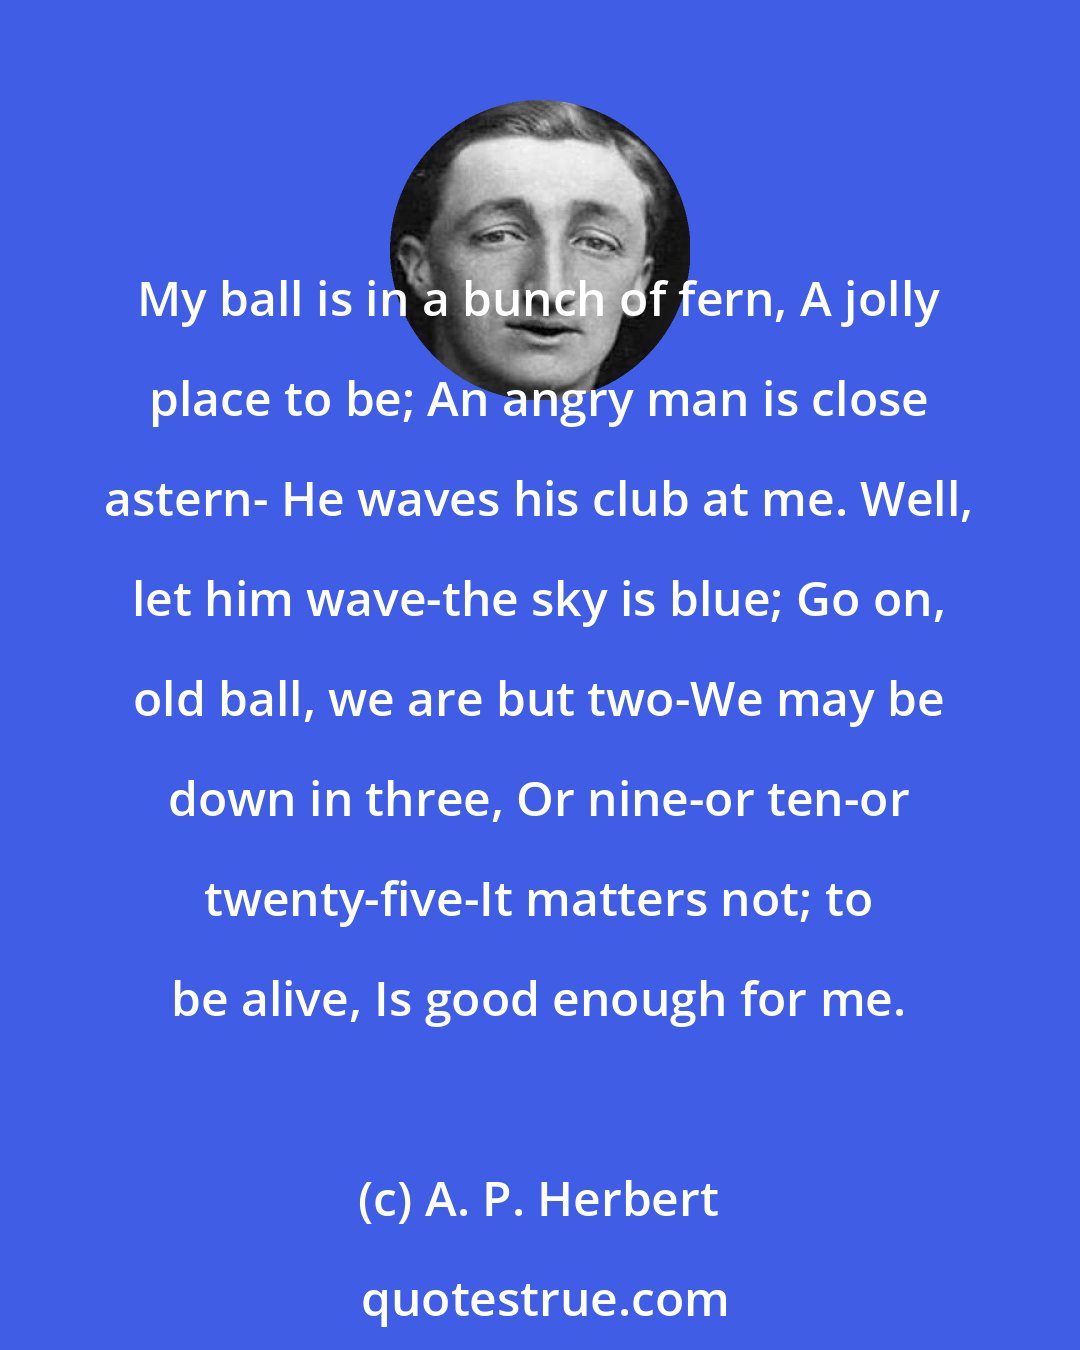 A. P. Herbert: My ball is in a bunch of fern, A jolly place to be; An angry man is close astern- He waves his club at me. Well, let him wave-the sky is blue; Go on, old ball, we are but two-We may be down in three, Or nine-or ten-or twenty-five-It matters not; to be alive, Is good enough for me.